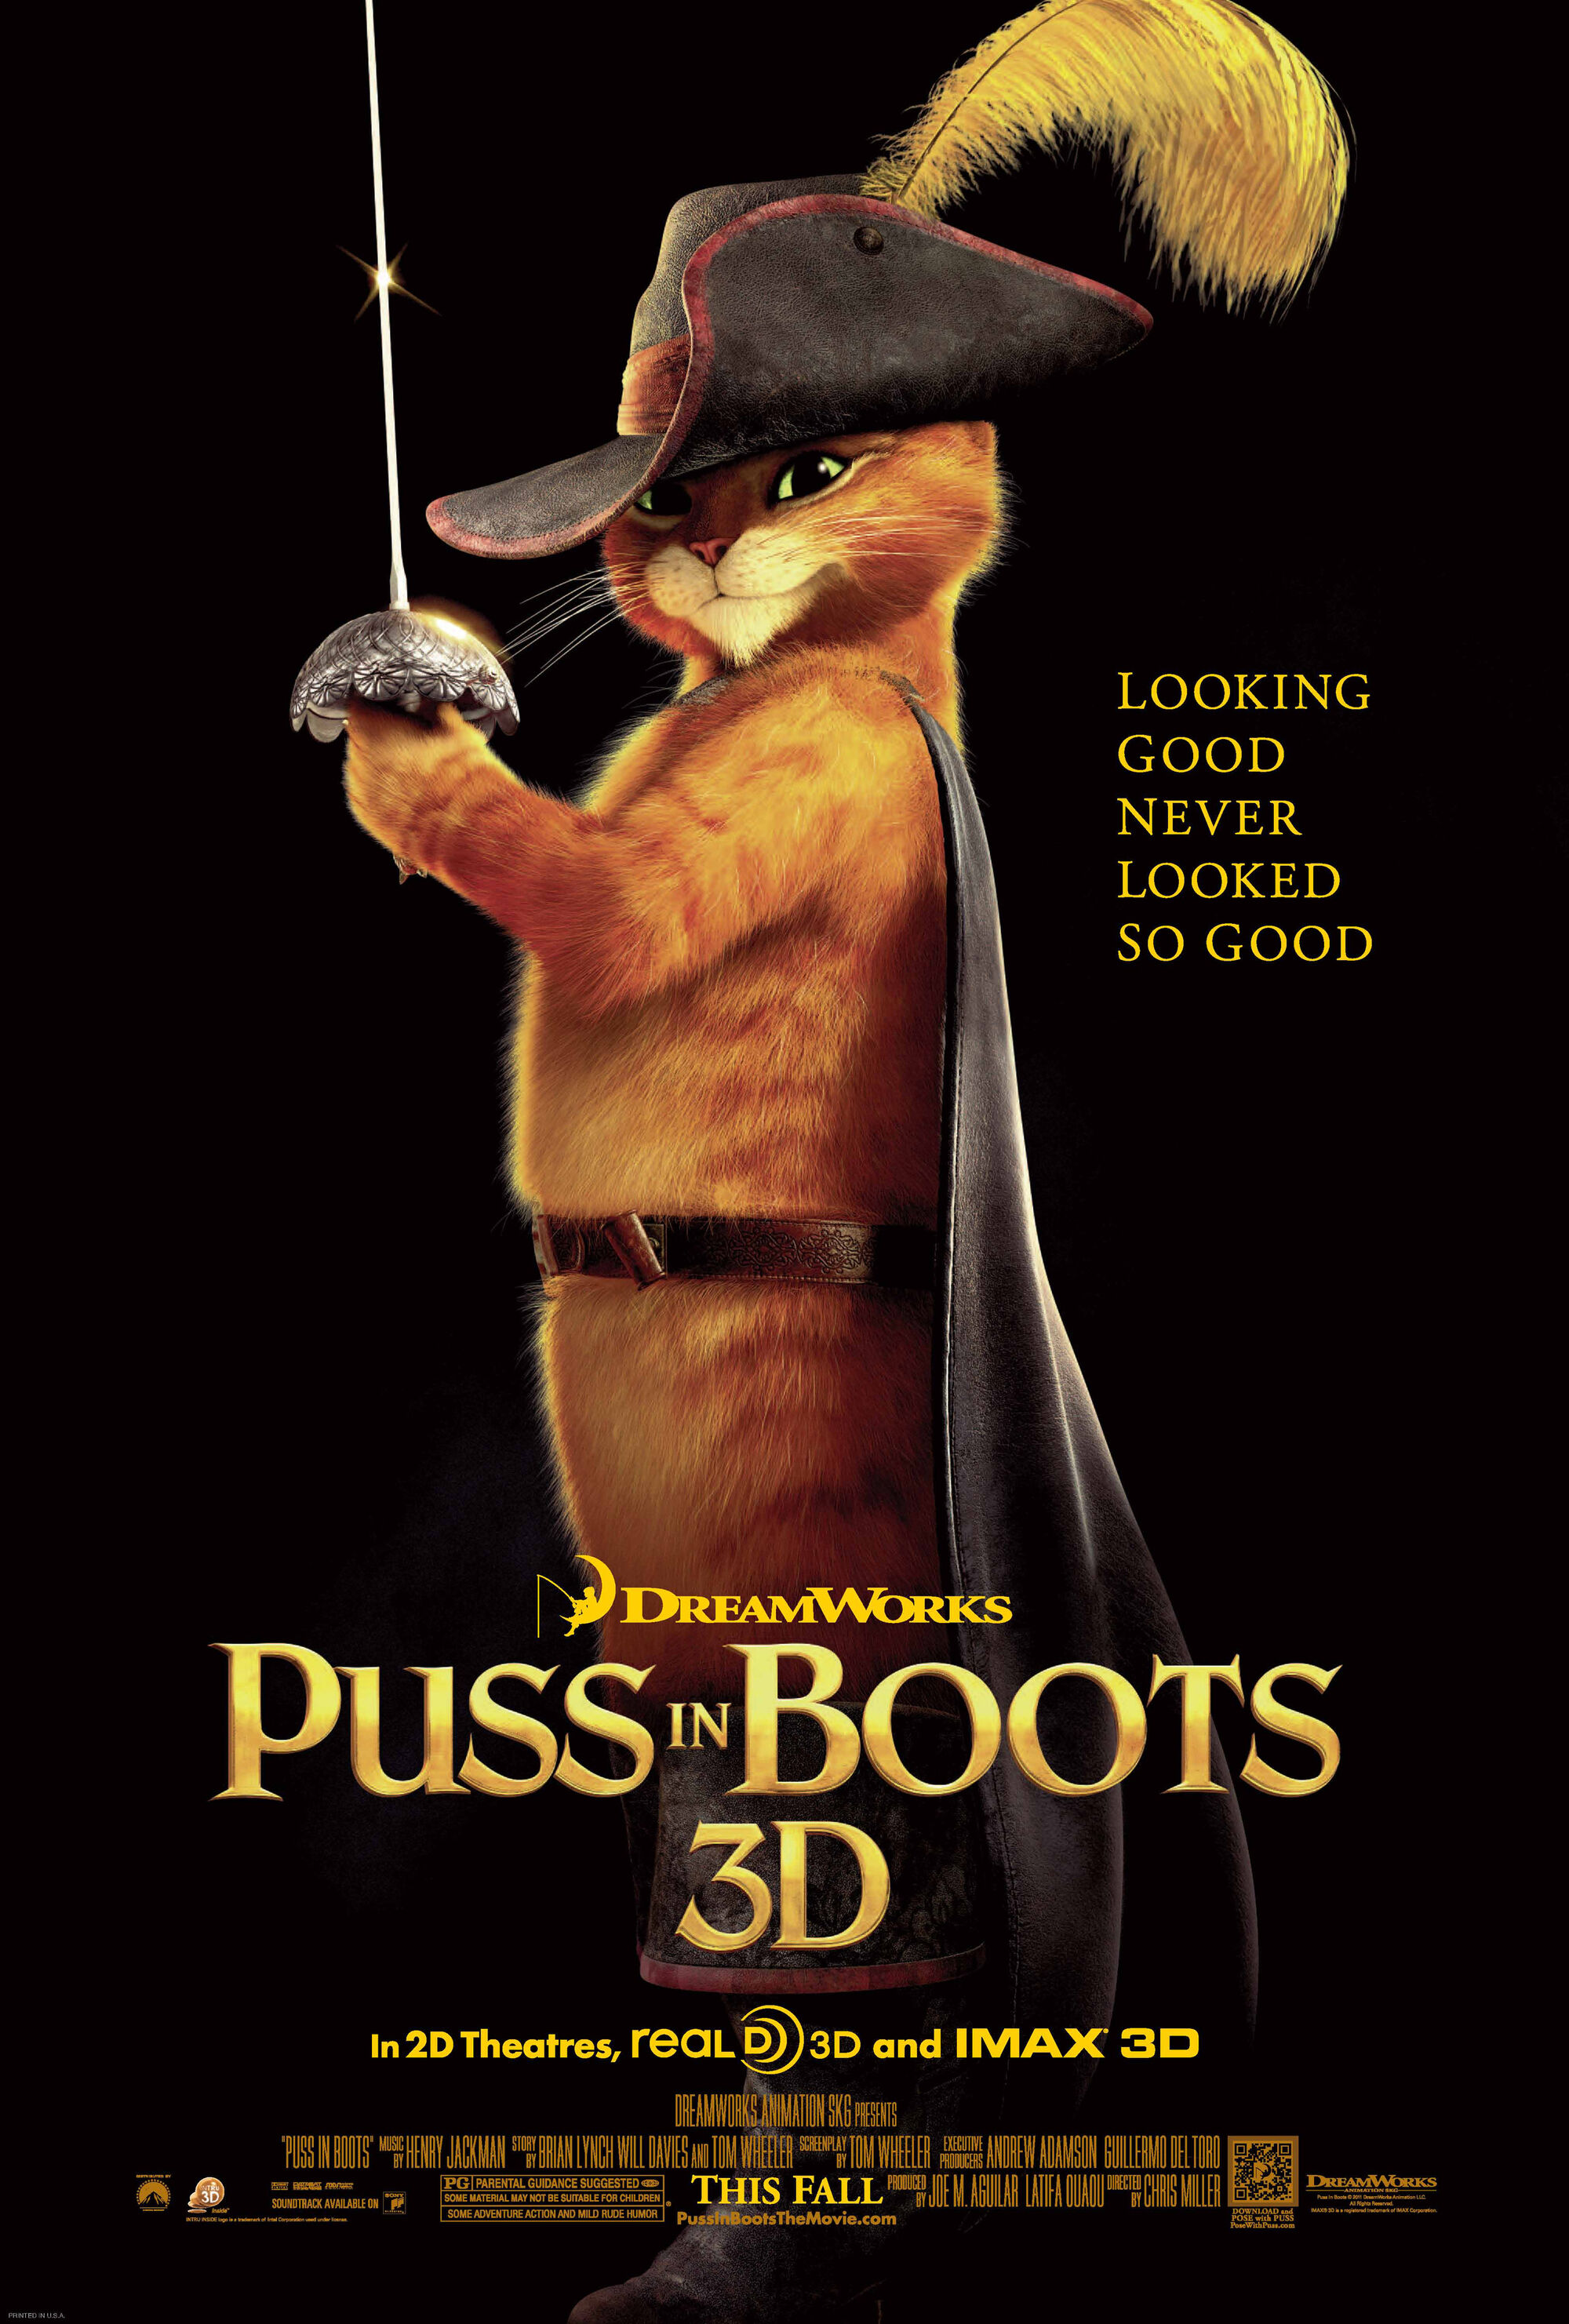 puss in boots last wish